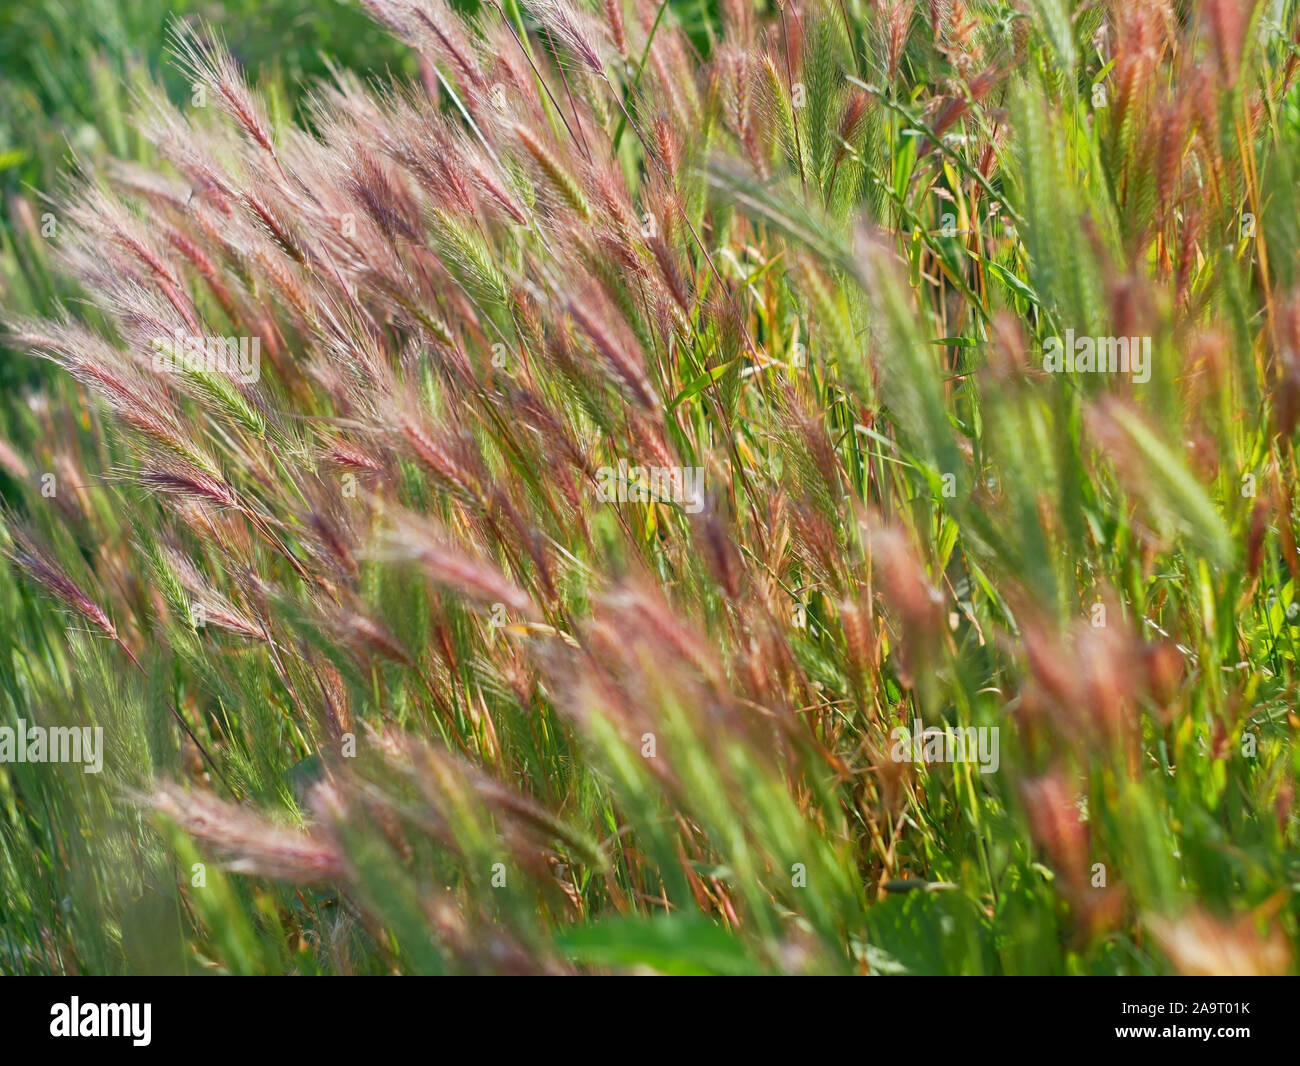 Cereal plants with reddish color ears flutter in the wind Stock Photo